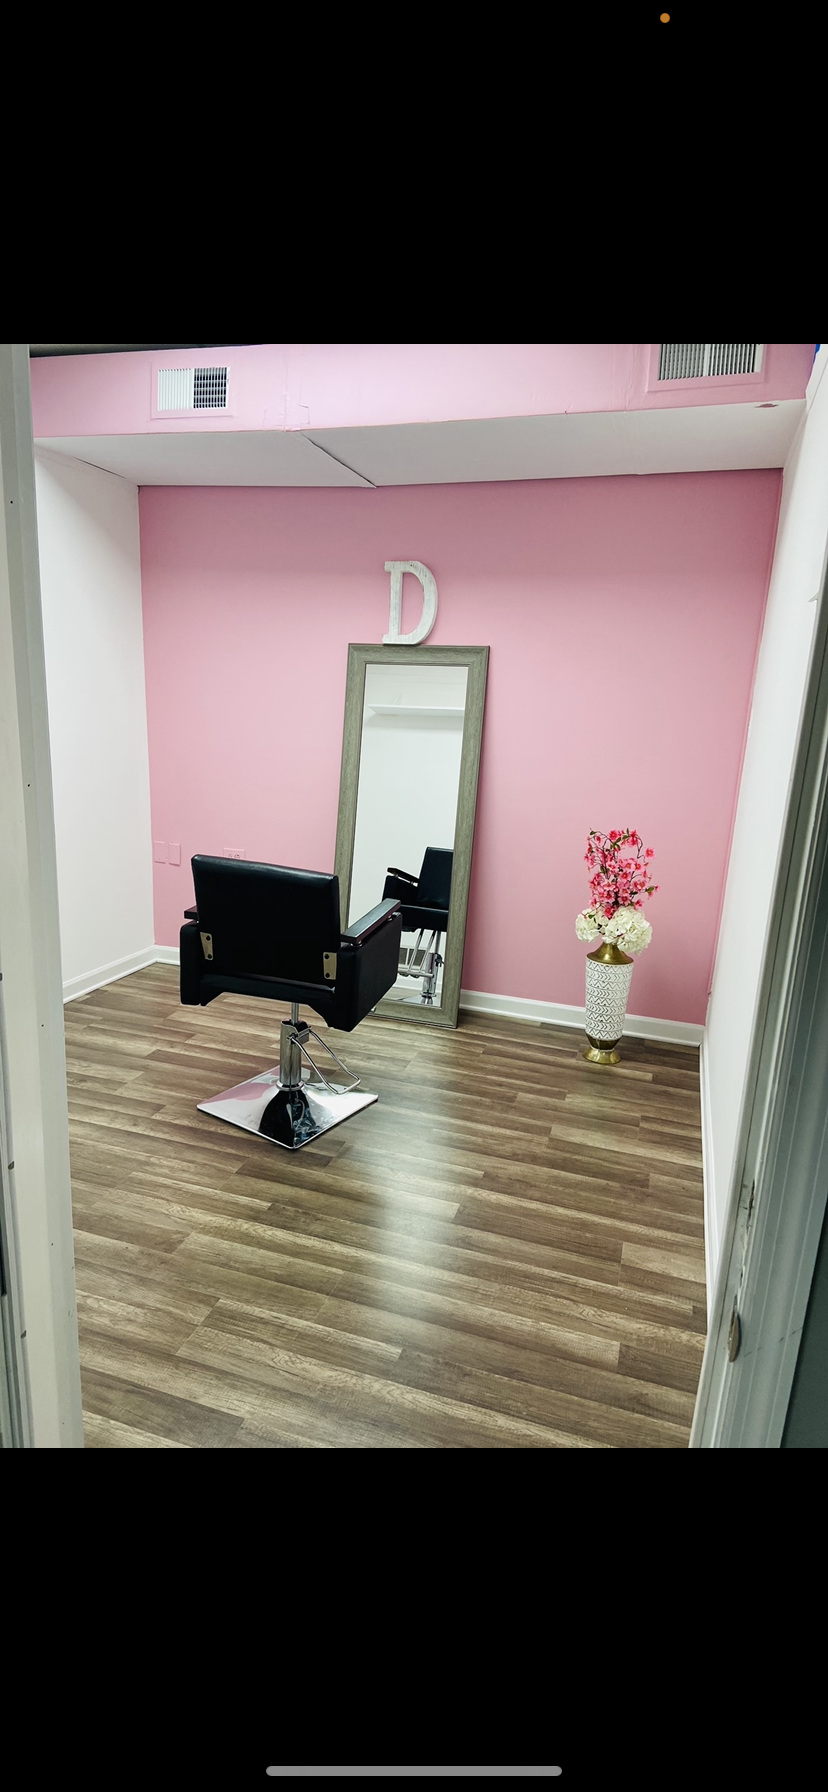 D4 Salon Suites 4973 Lebanon Pike, Old Hickory Tennessee 37138